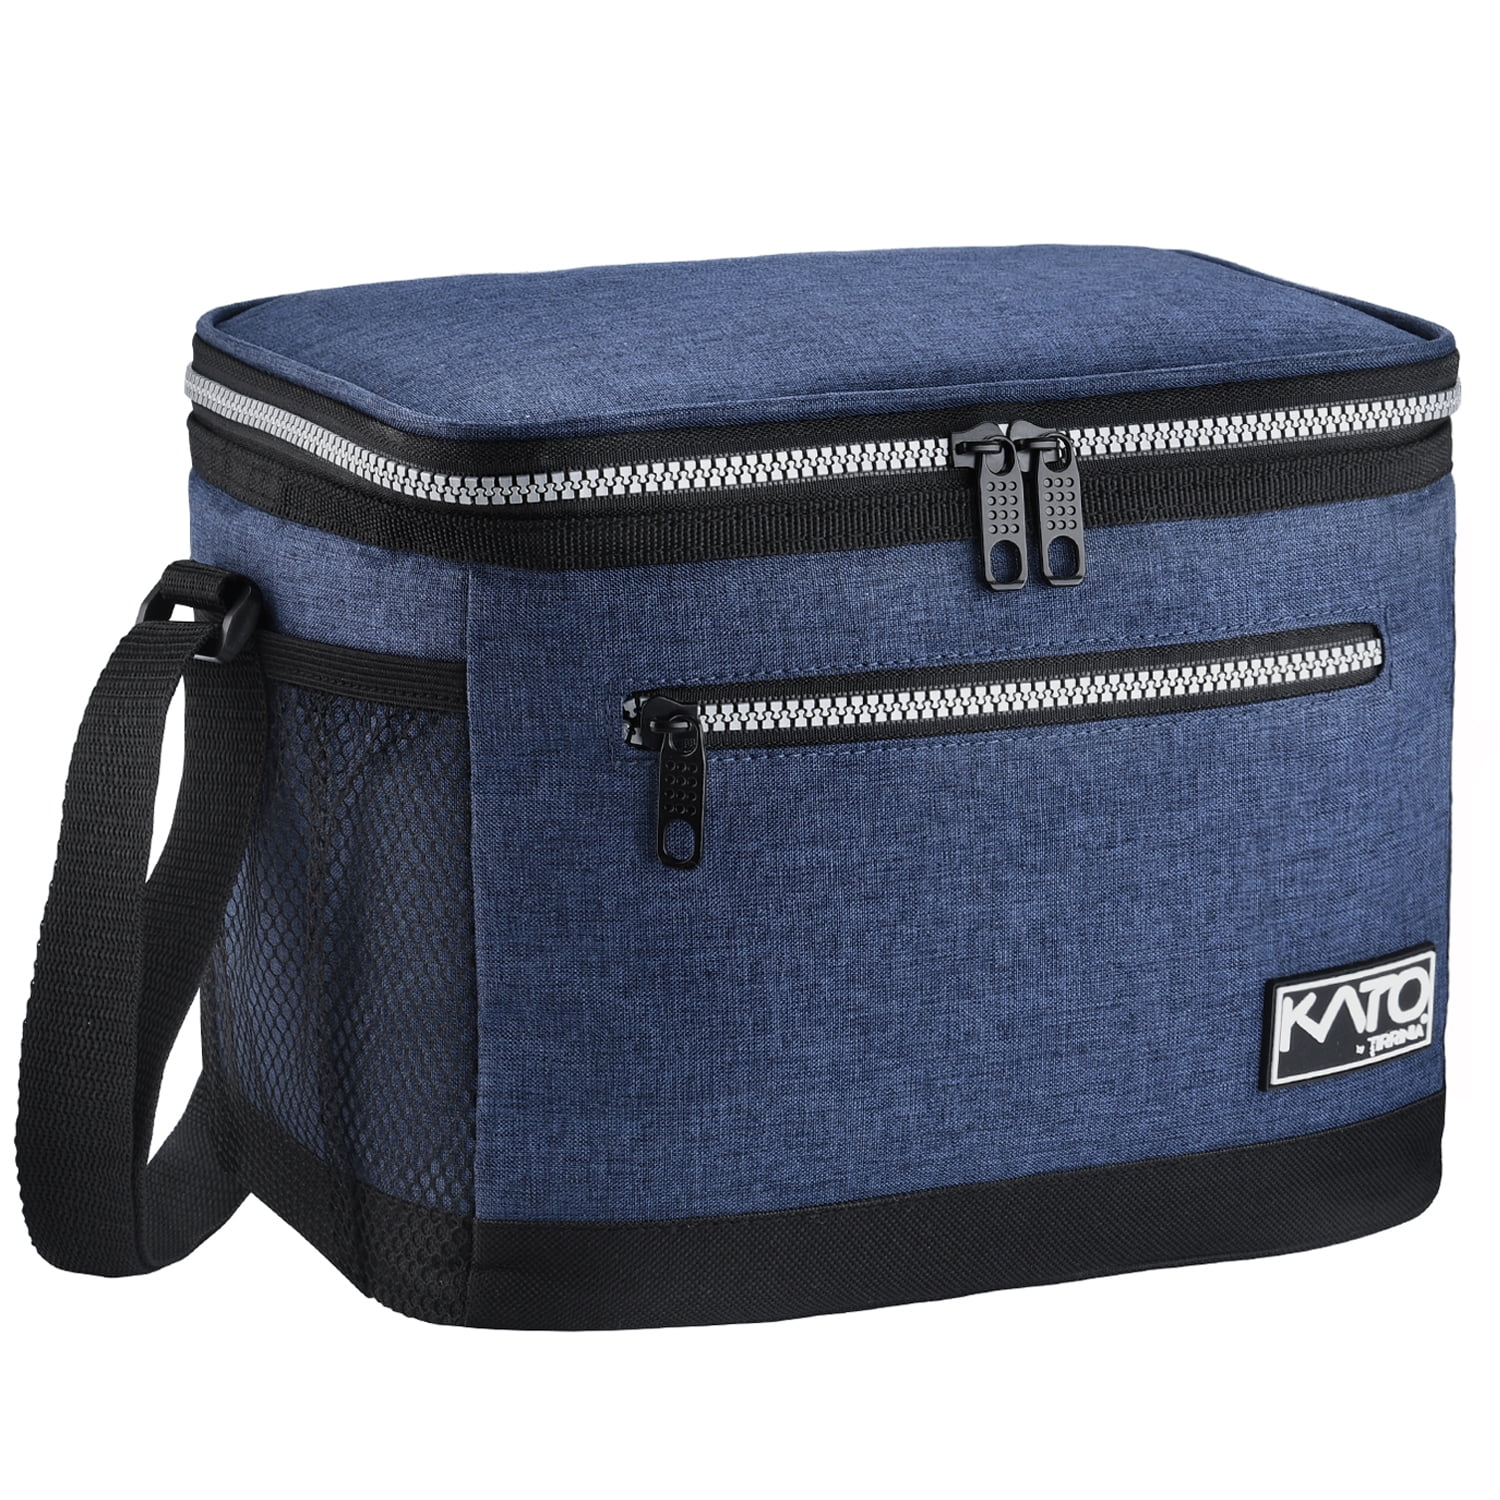 PuTwo Insulated Lunch Bag 8L Leakproof Lunch Bag for Adults Lunch Bag for Kids Women Men Lunch Boxes Picnic Bags Lunch Cooler Bag Meal Prep Bag Bento Box Lunch Tote for Camping Travel Denim Blue 